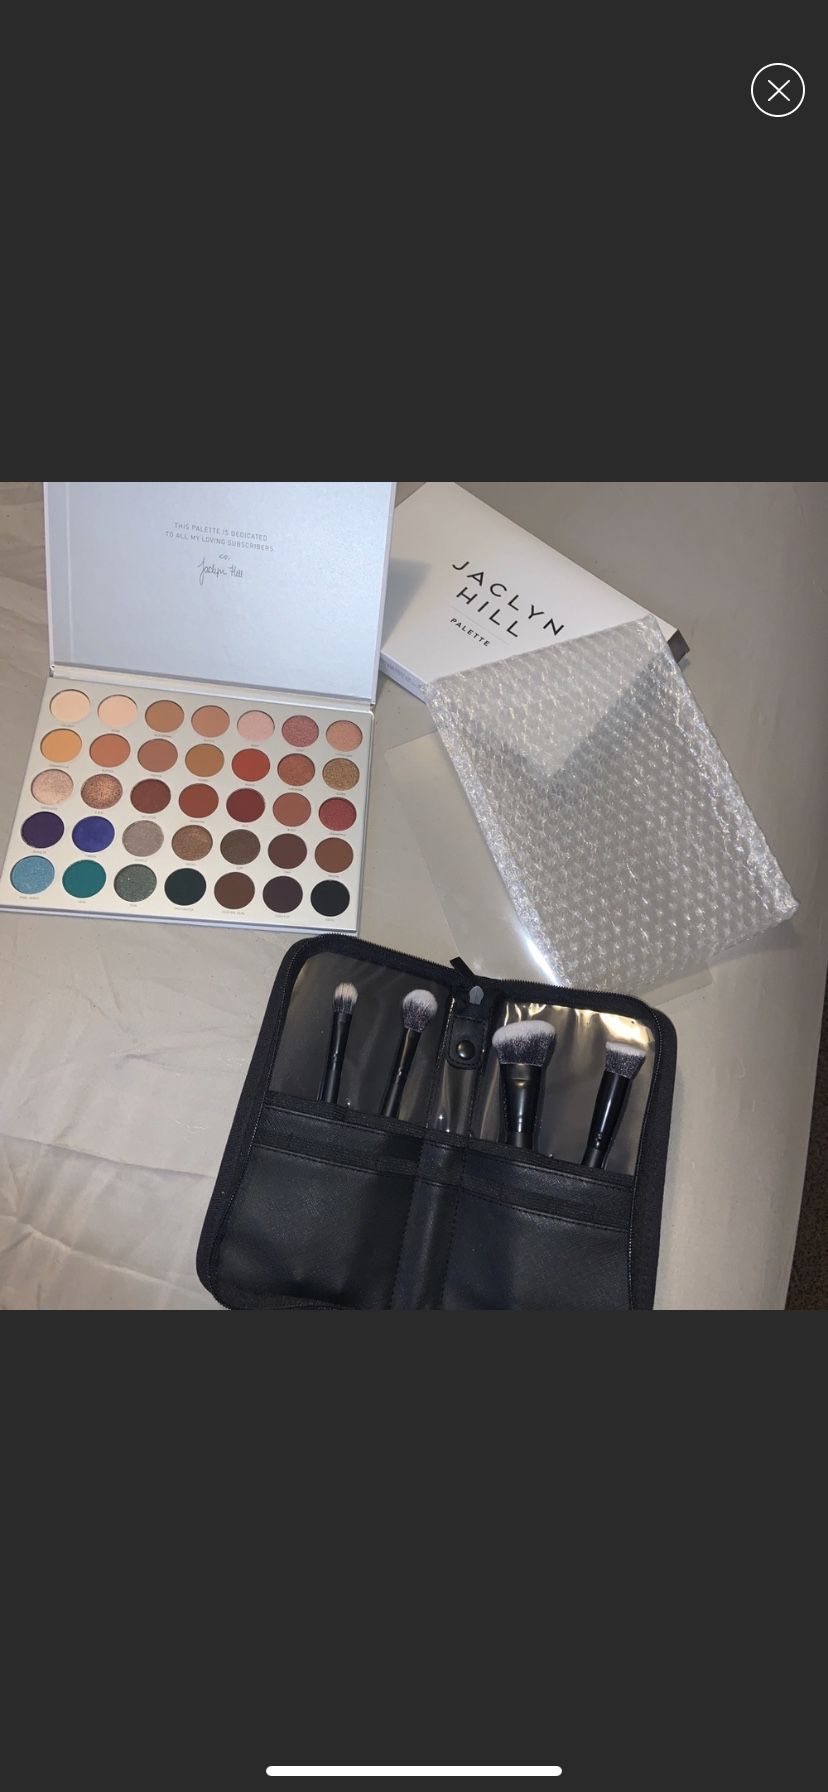 Jaclyn Hill palette and brushes